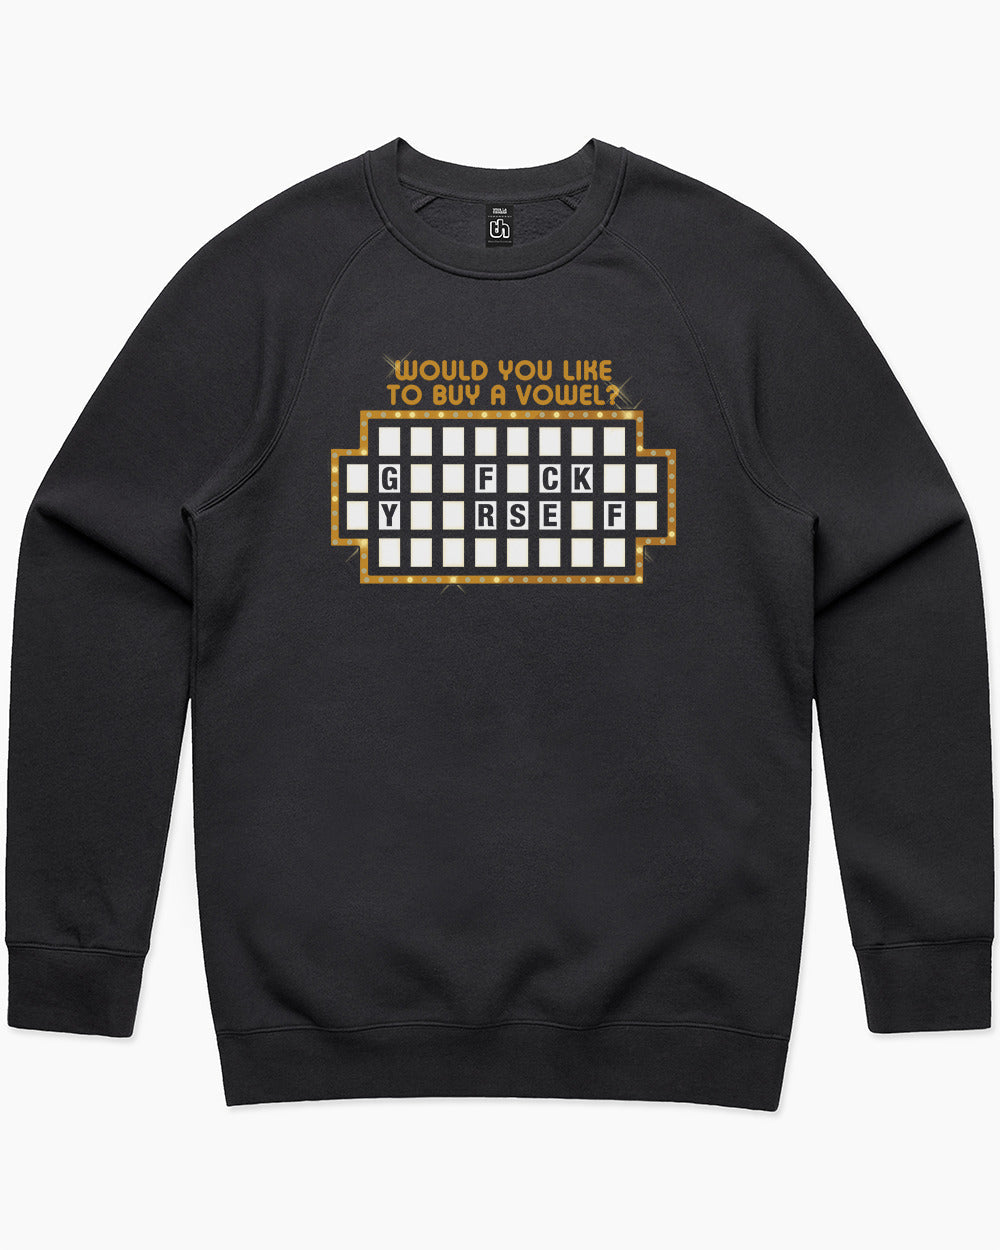 Would You Like To Buy A Vowel Or Would You To Buy A Vowel Sweater Europe Online #colour_black